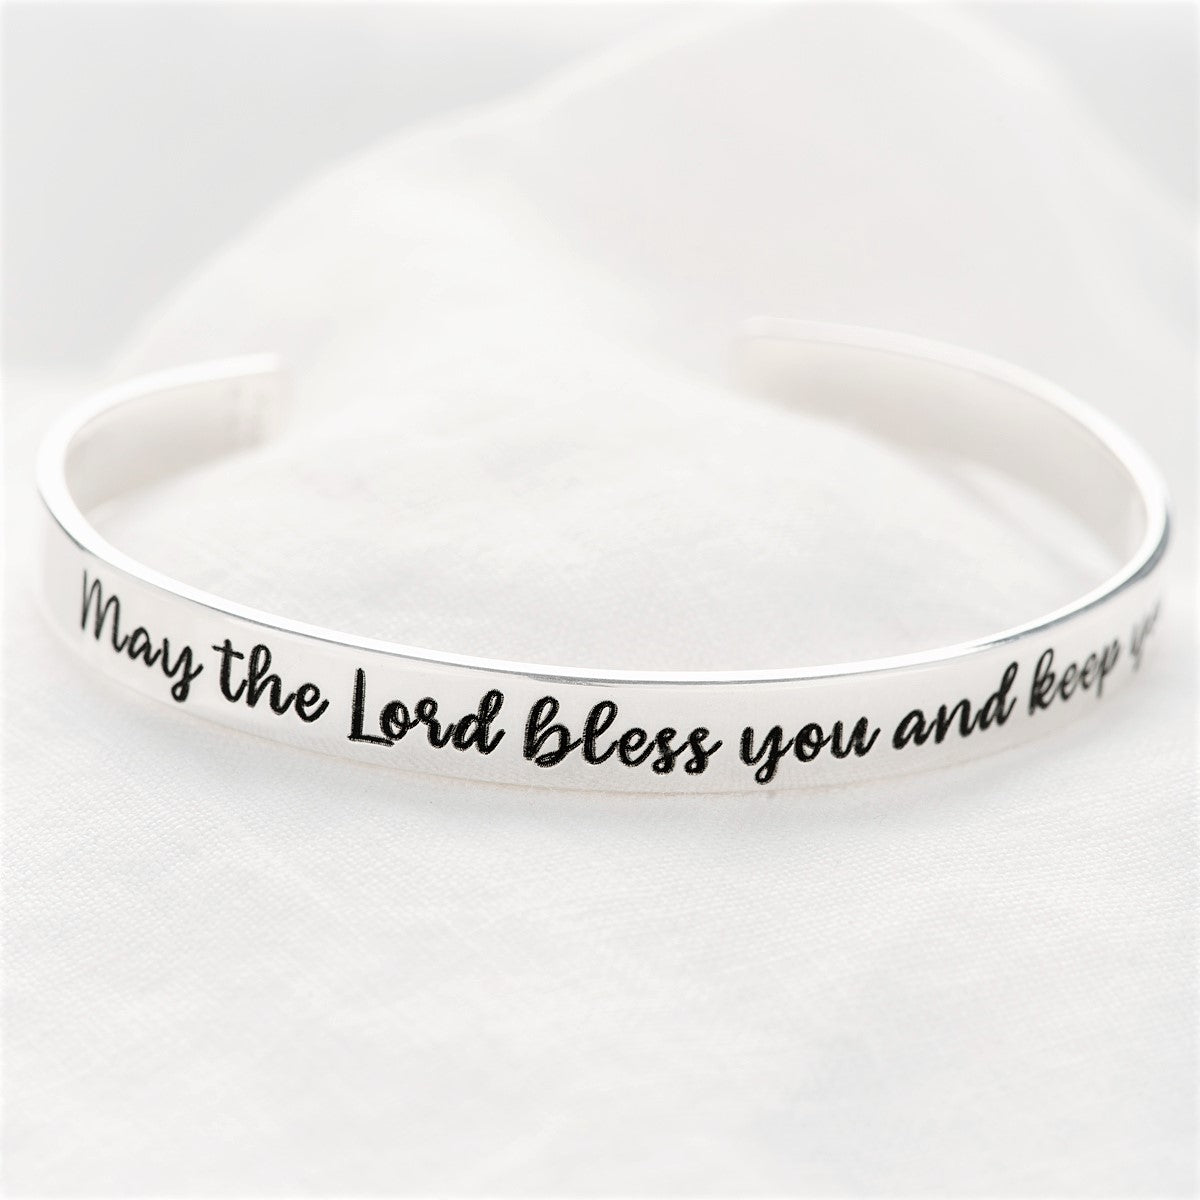 May The Lord Bless You and Keep You Engraved Cuff Bracelet | Numbers 6:24 | Sterling Silver or 14K Gold 14K Gold (6 Length Only) / 6 (Average)